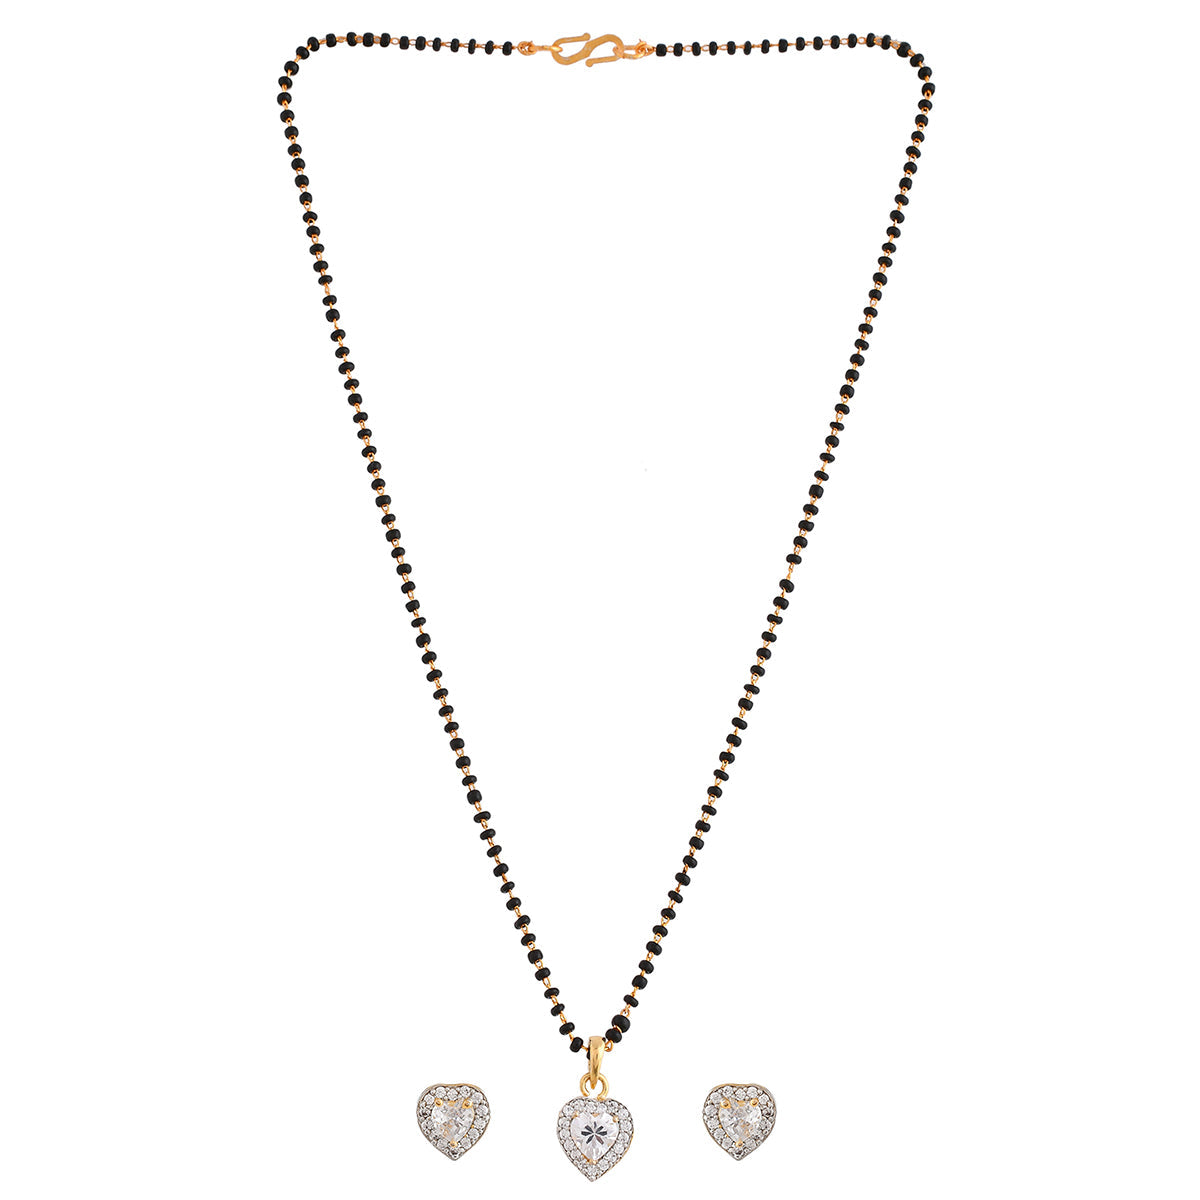 Women's Sparkling Essential White Heart Shaped Cz Studded Gold Plated Mangalsutra Set - Voylla